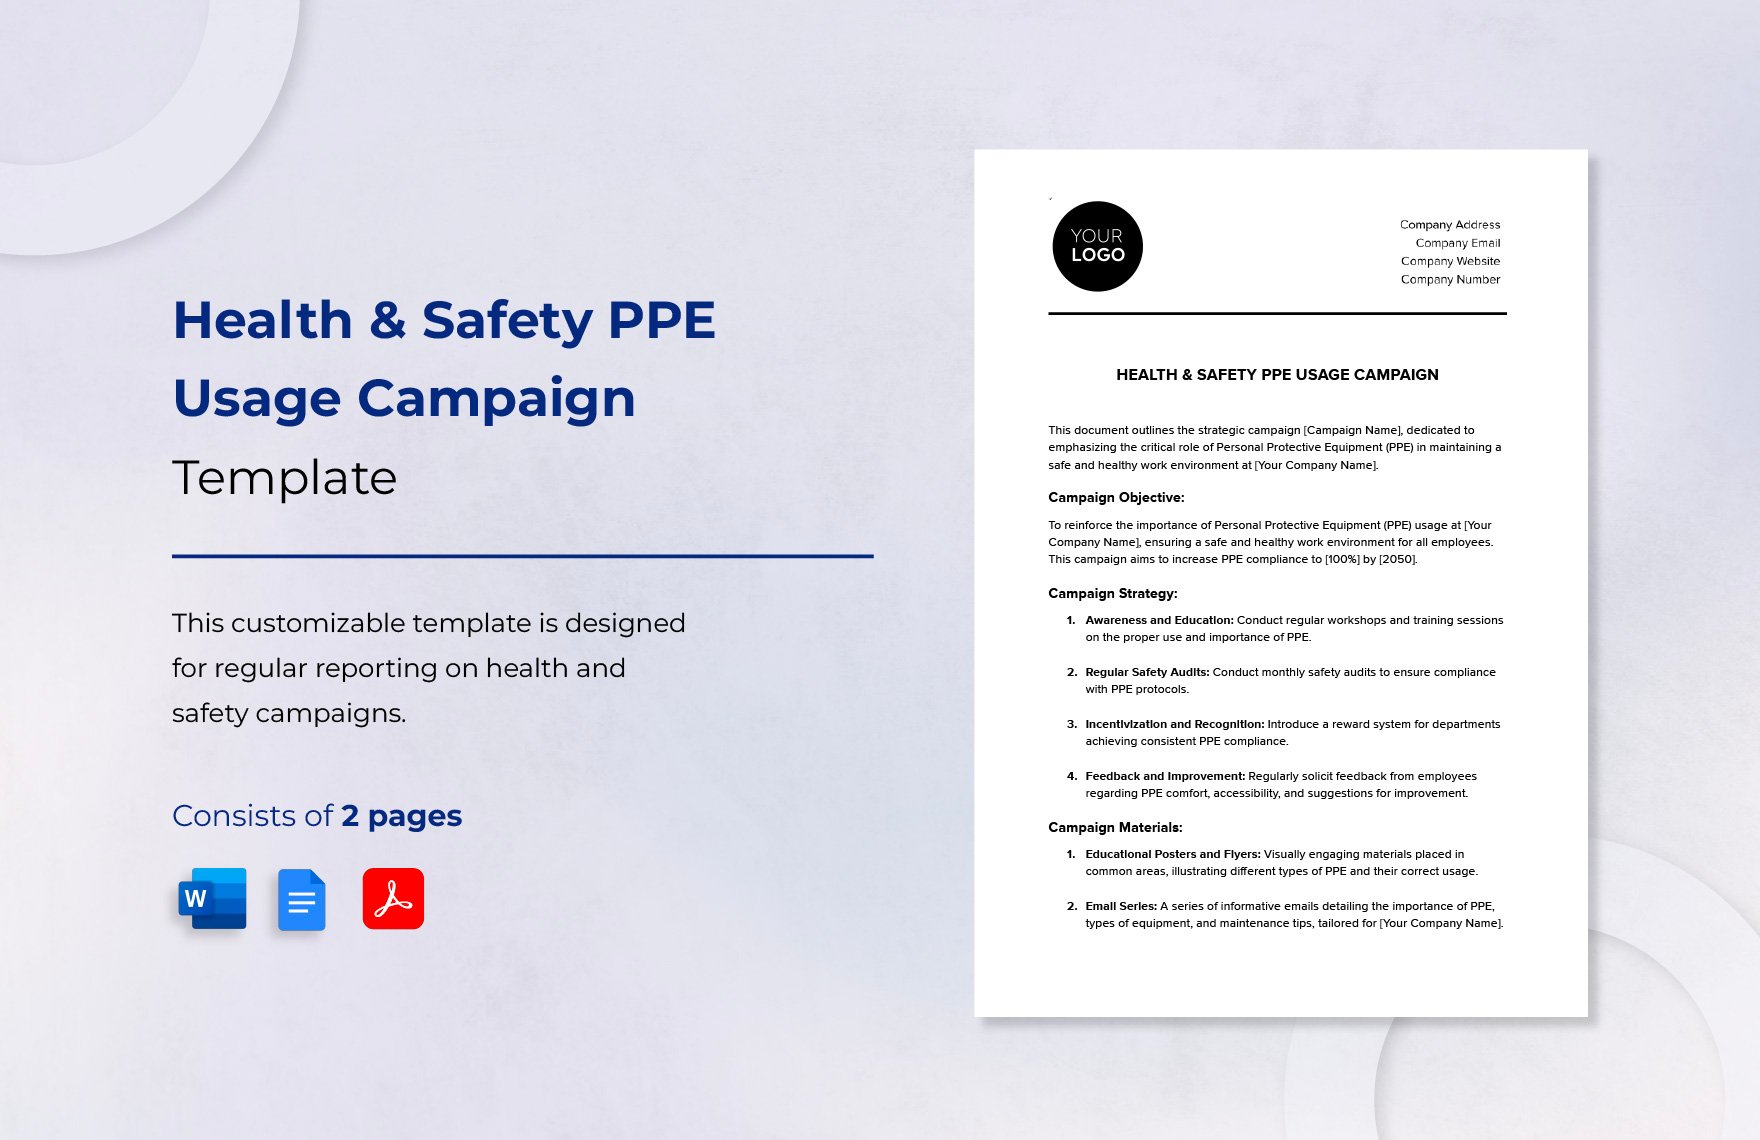 Health & Safety PPE Usage Campaign Template